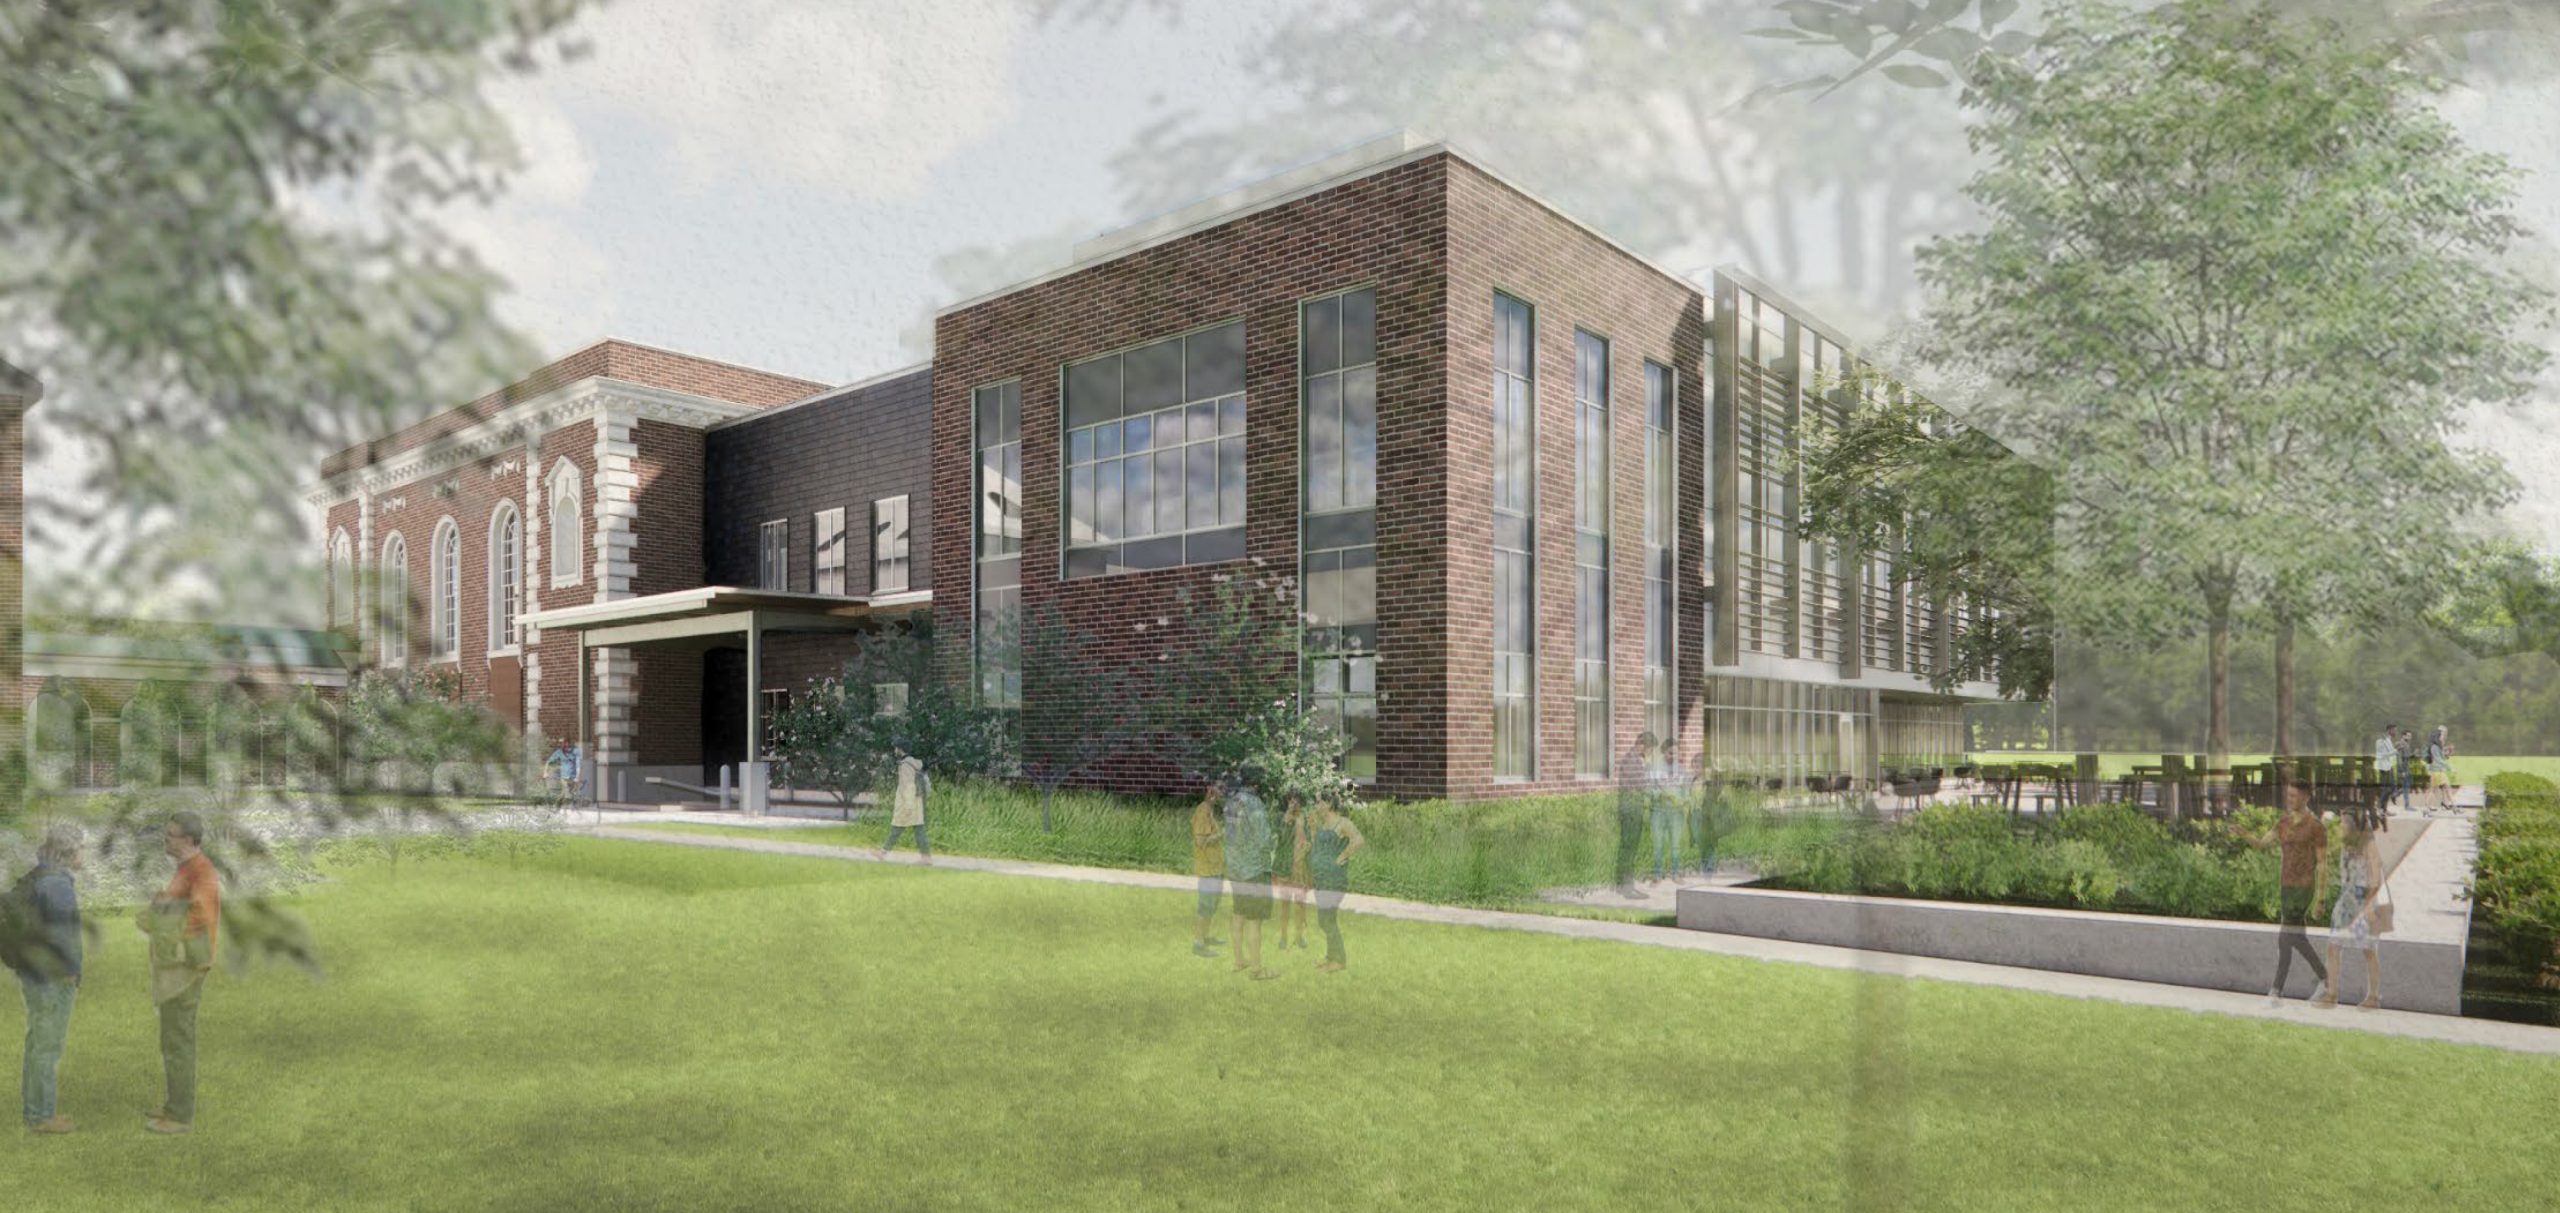 Rendering of expanded and renovated Lilly Library, showing NW corner with new loading dock area and windows.